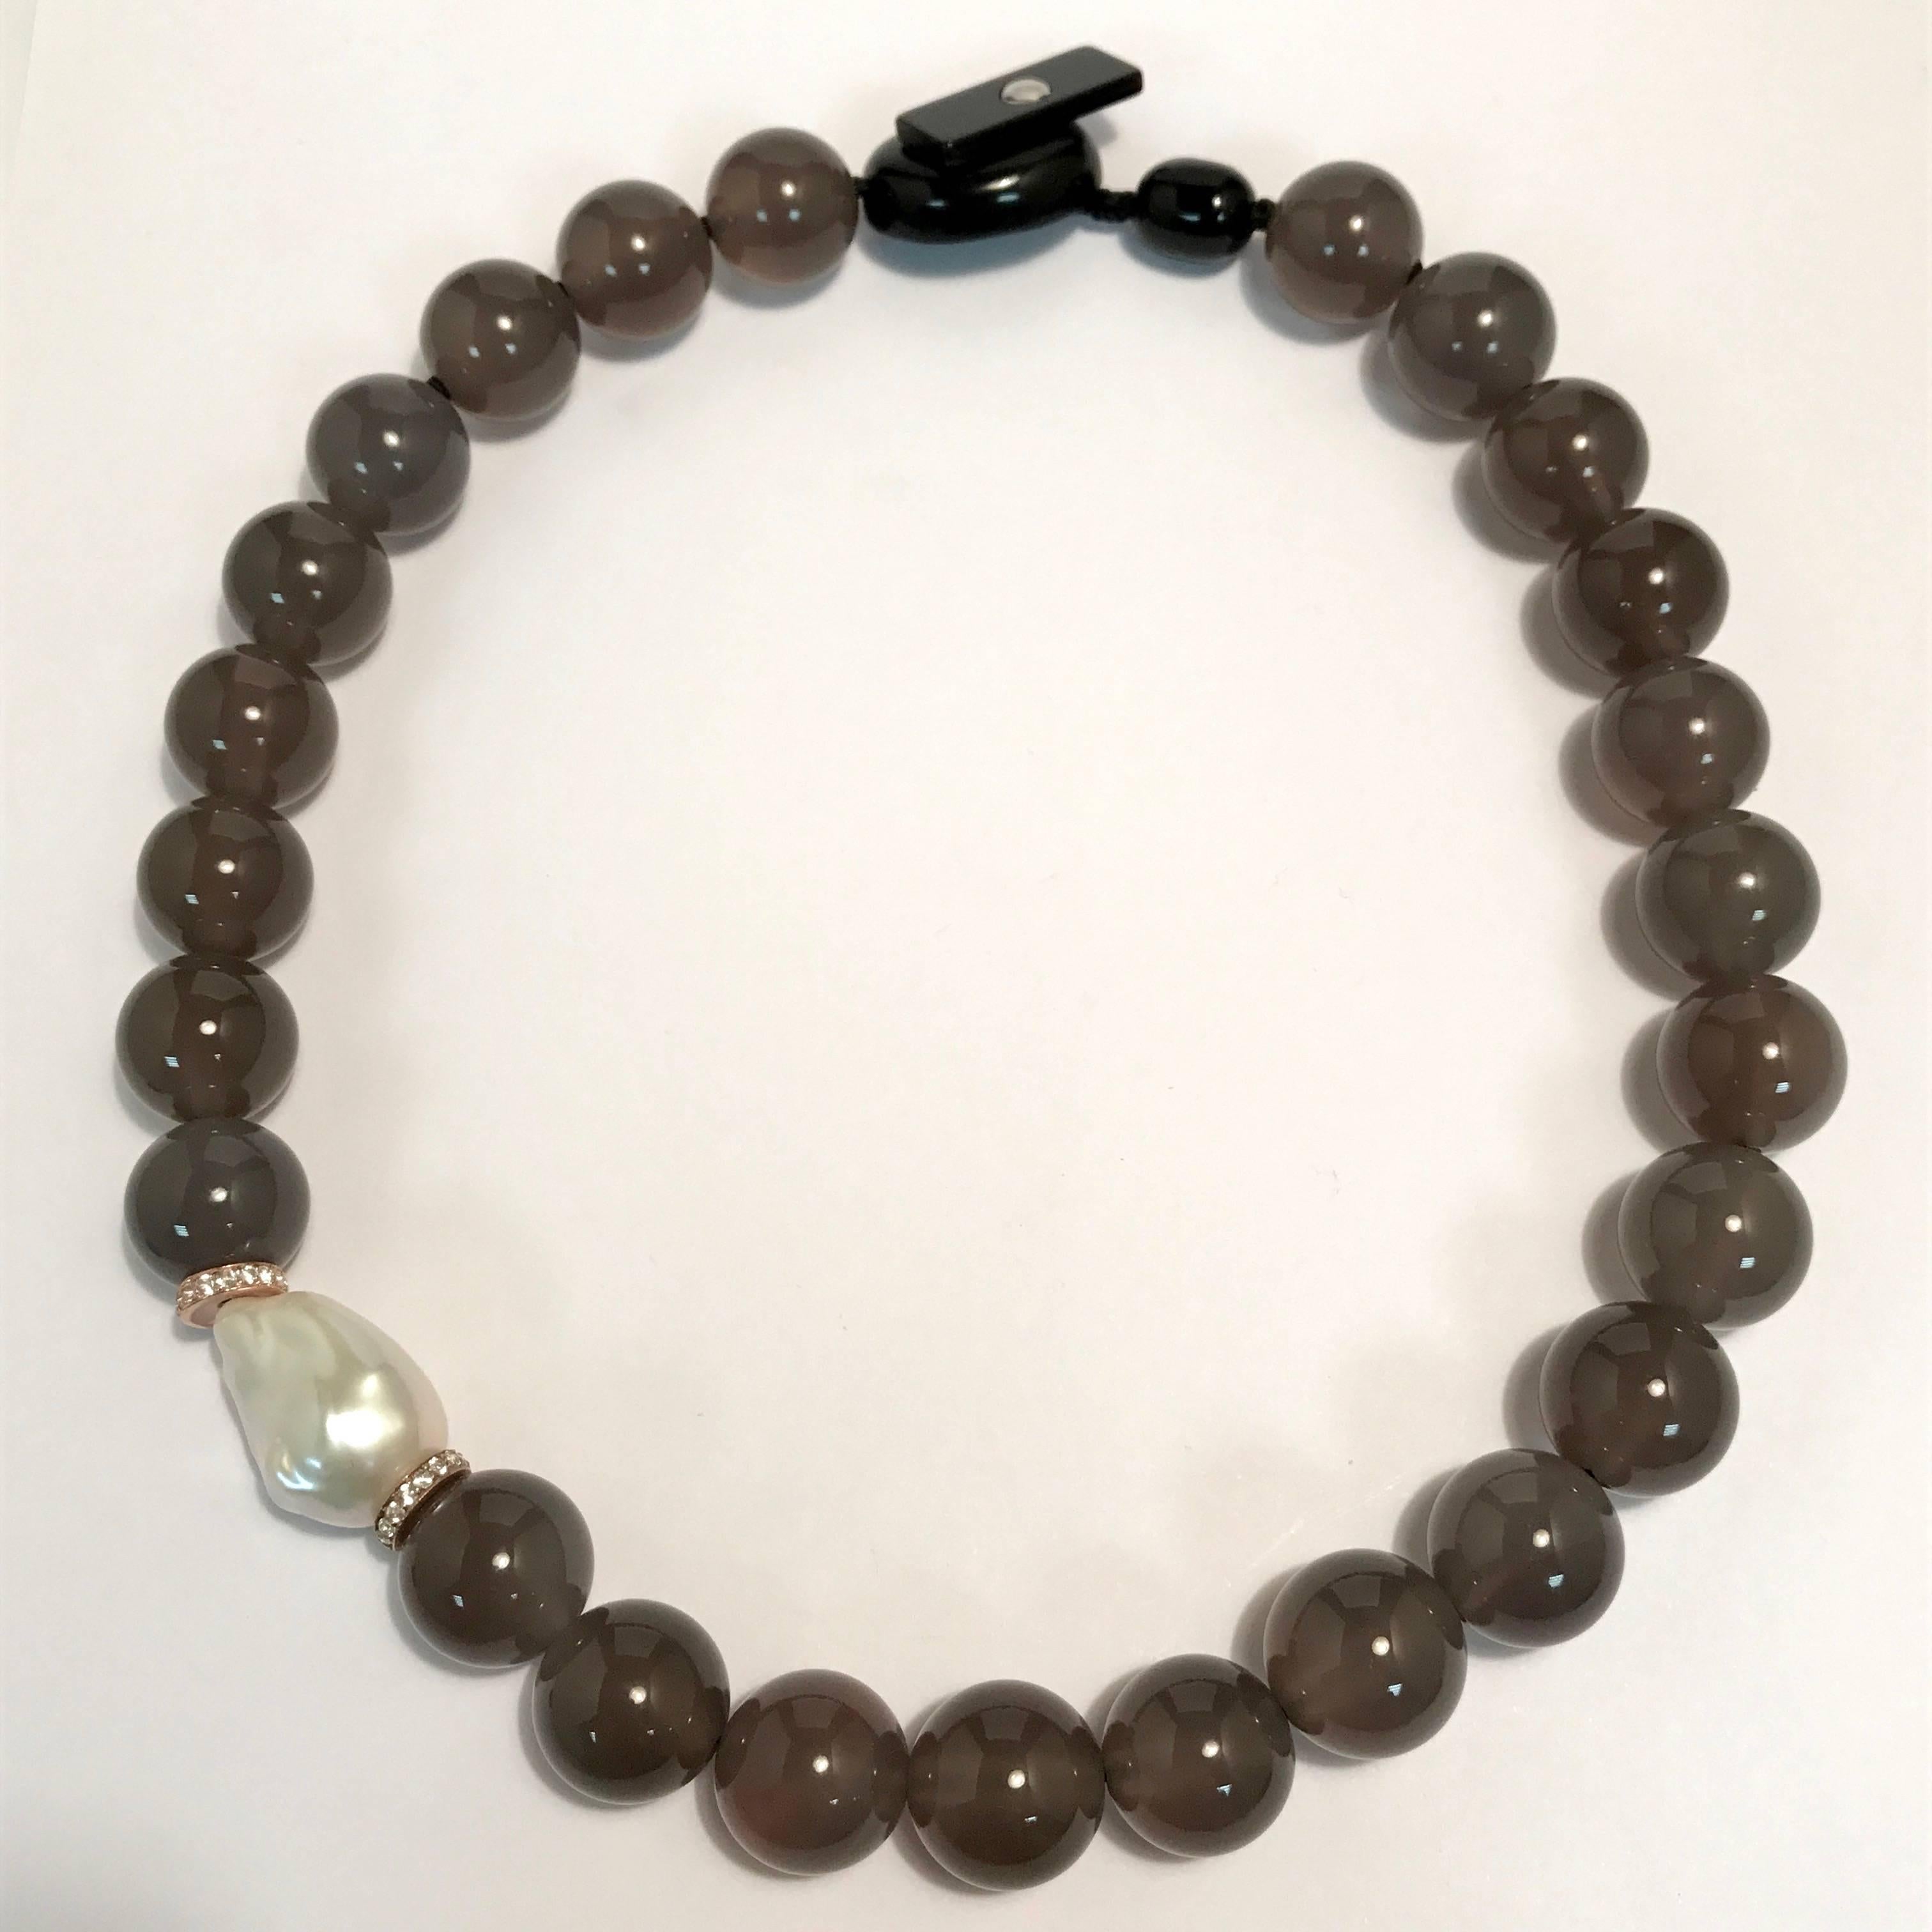 Grey Agates, Green Sapphires and Cultured Pearl Necklace.

Grey Agates
Green Sapphires
Cultured Pearl Necklace